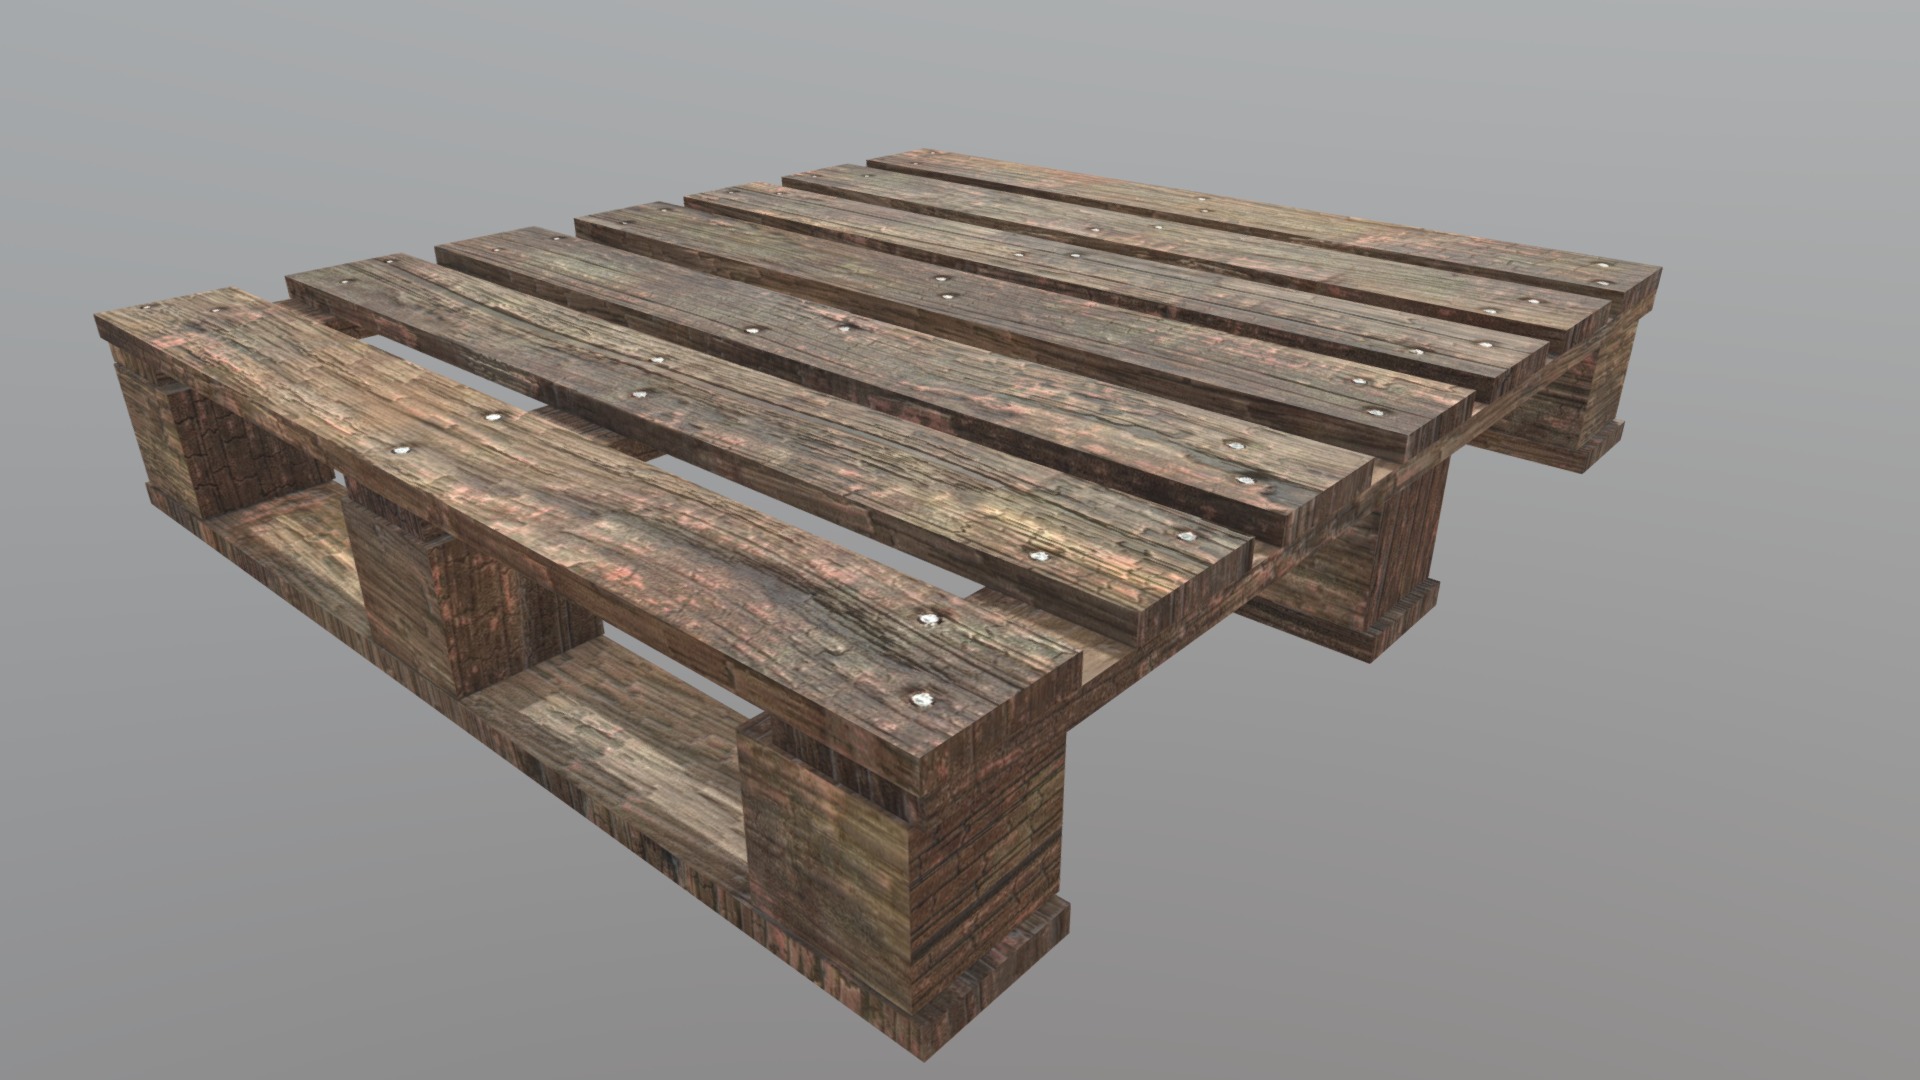 3D model Old Pallet Game asset - This is a 3D model of the Old Pallet Game asset. The 3D model is about a wooden box with a wooden top.